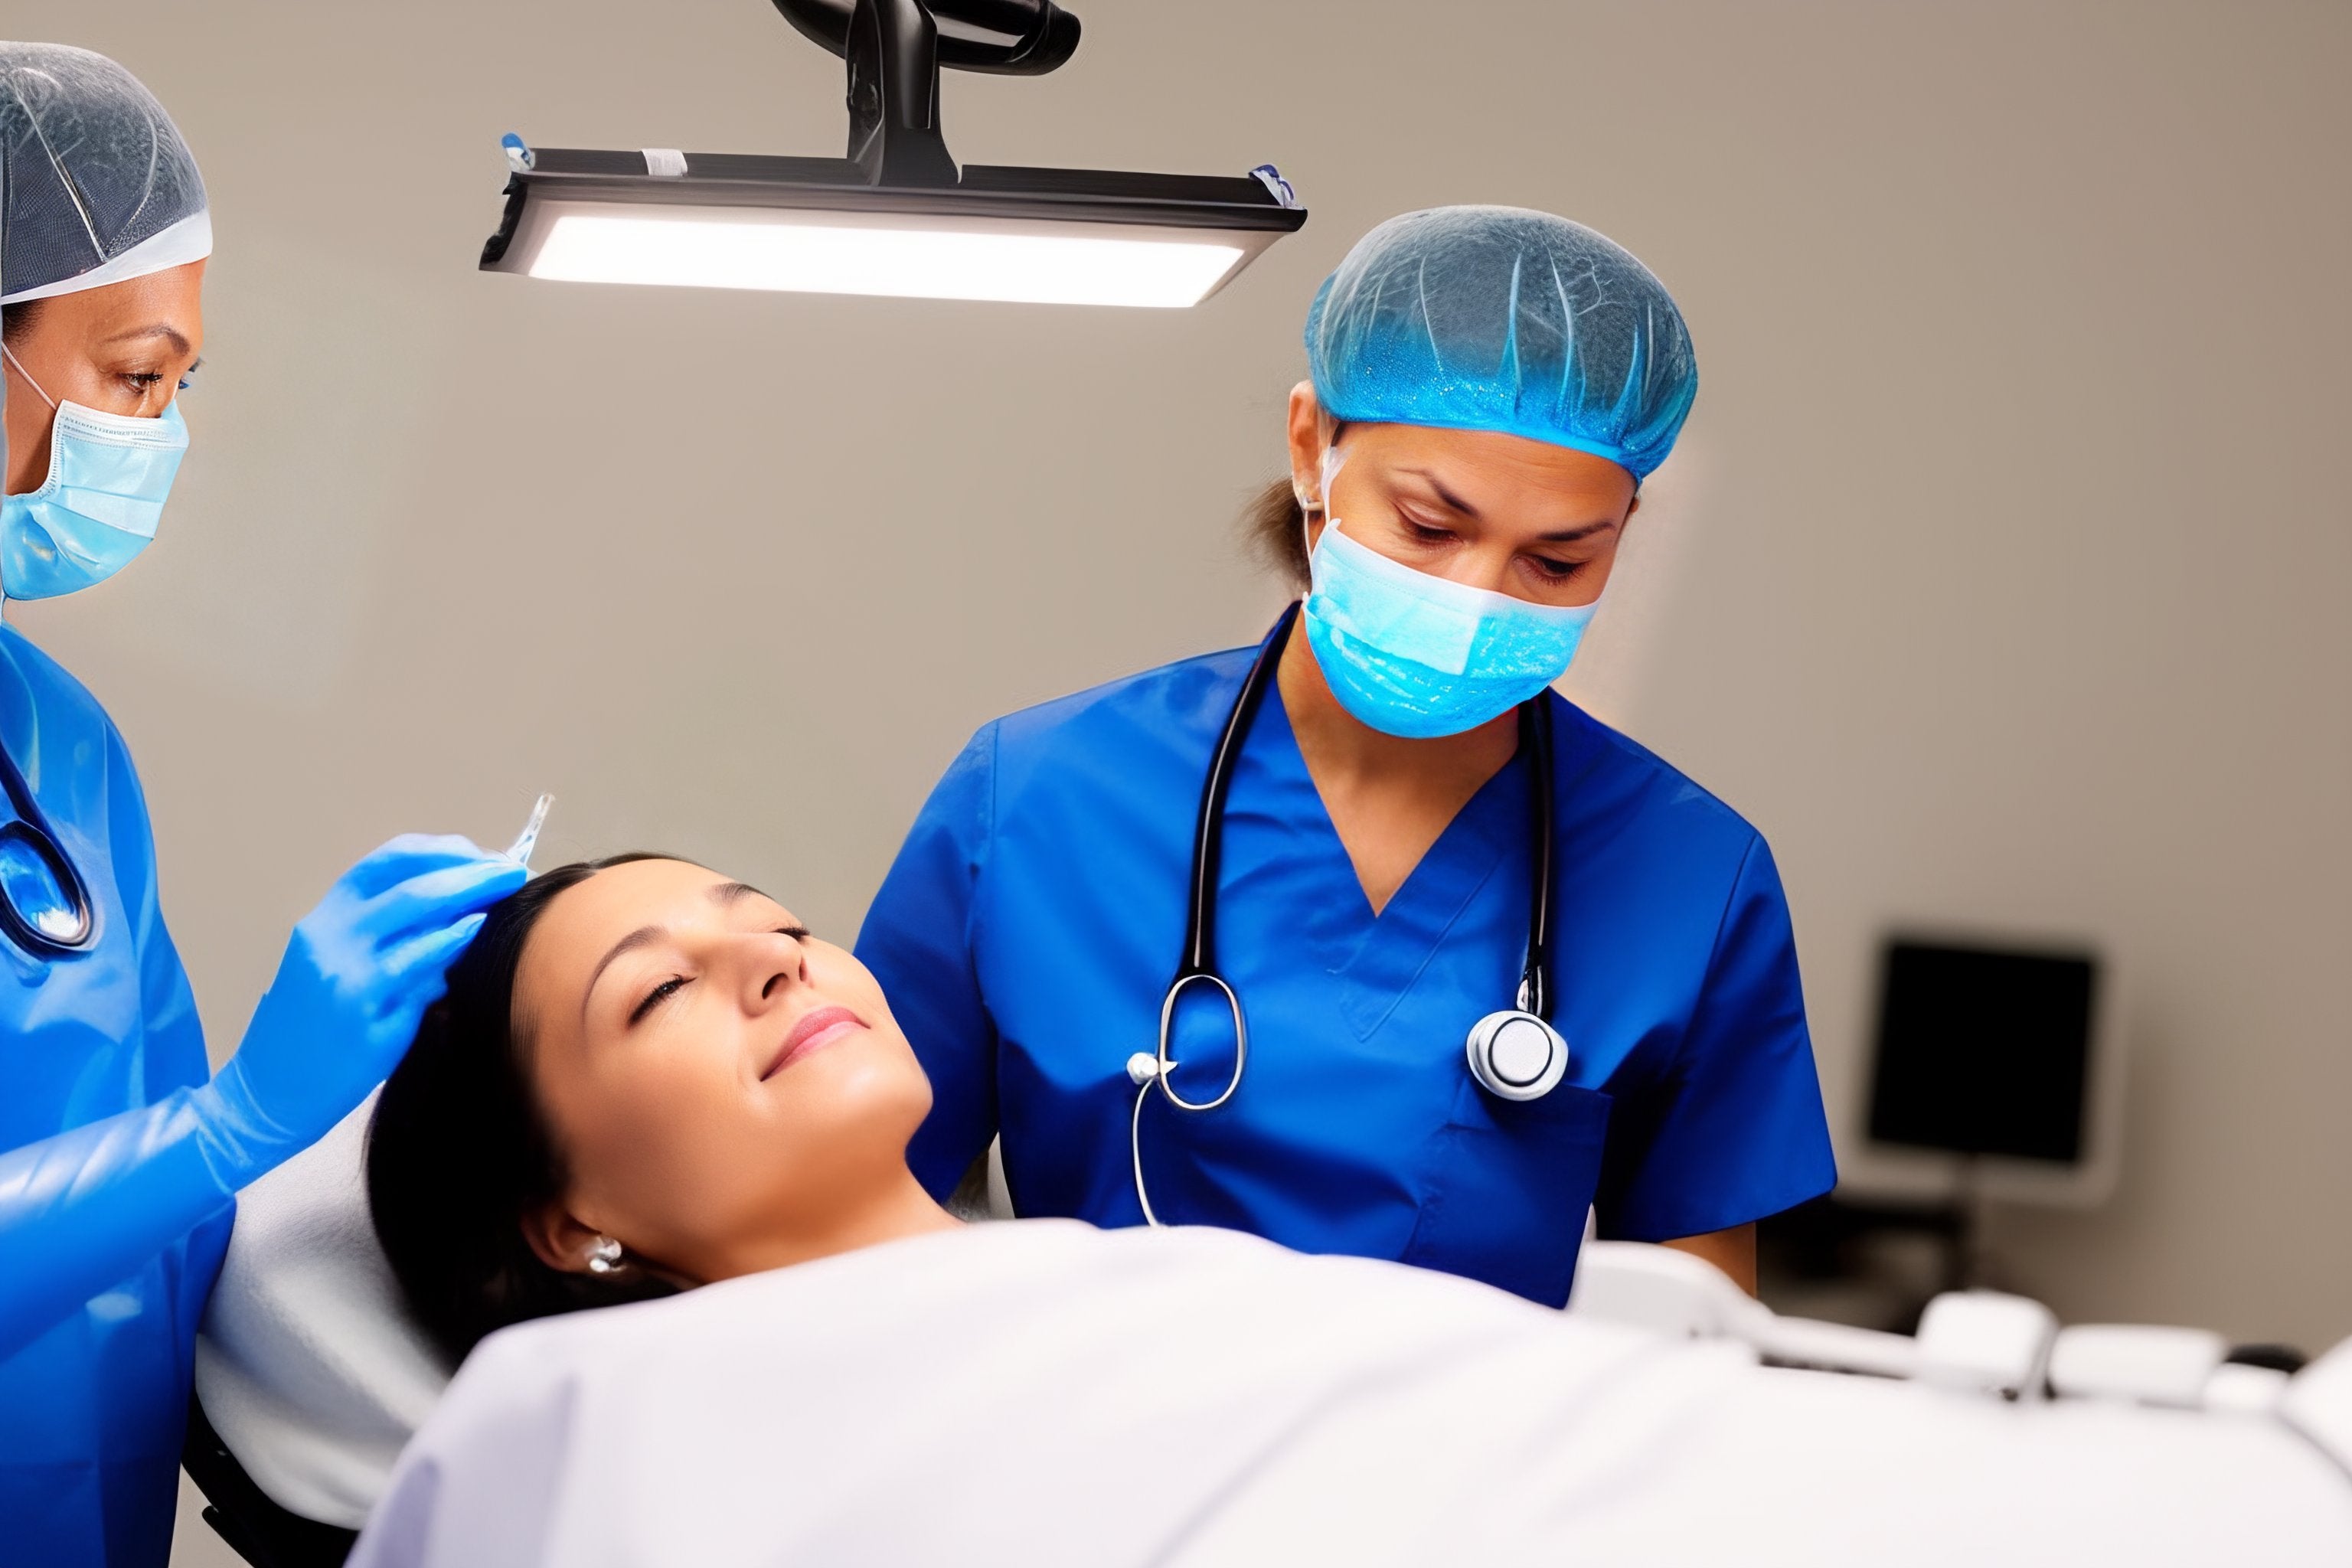 Why is thyroidectomy necessary? A patient lies on an operating table with a female surgeon standing nearby. The patient's neck is illuminated by a bright light, highlighting the area to be operated on. The doctor is wearing scrubs and latex gloves, his face serious as he prepares for the procedure